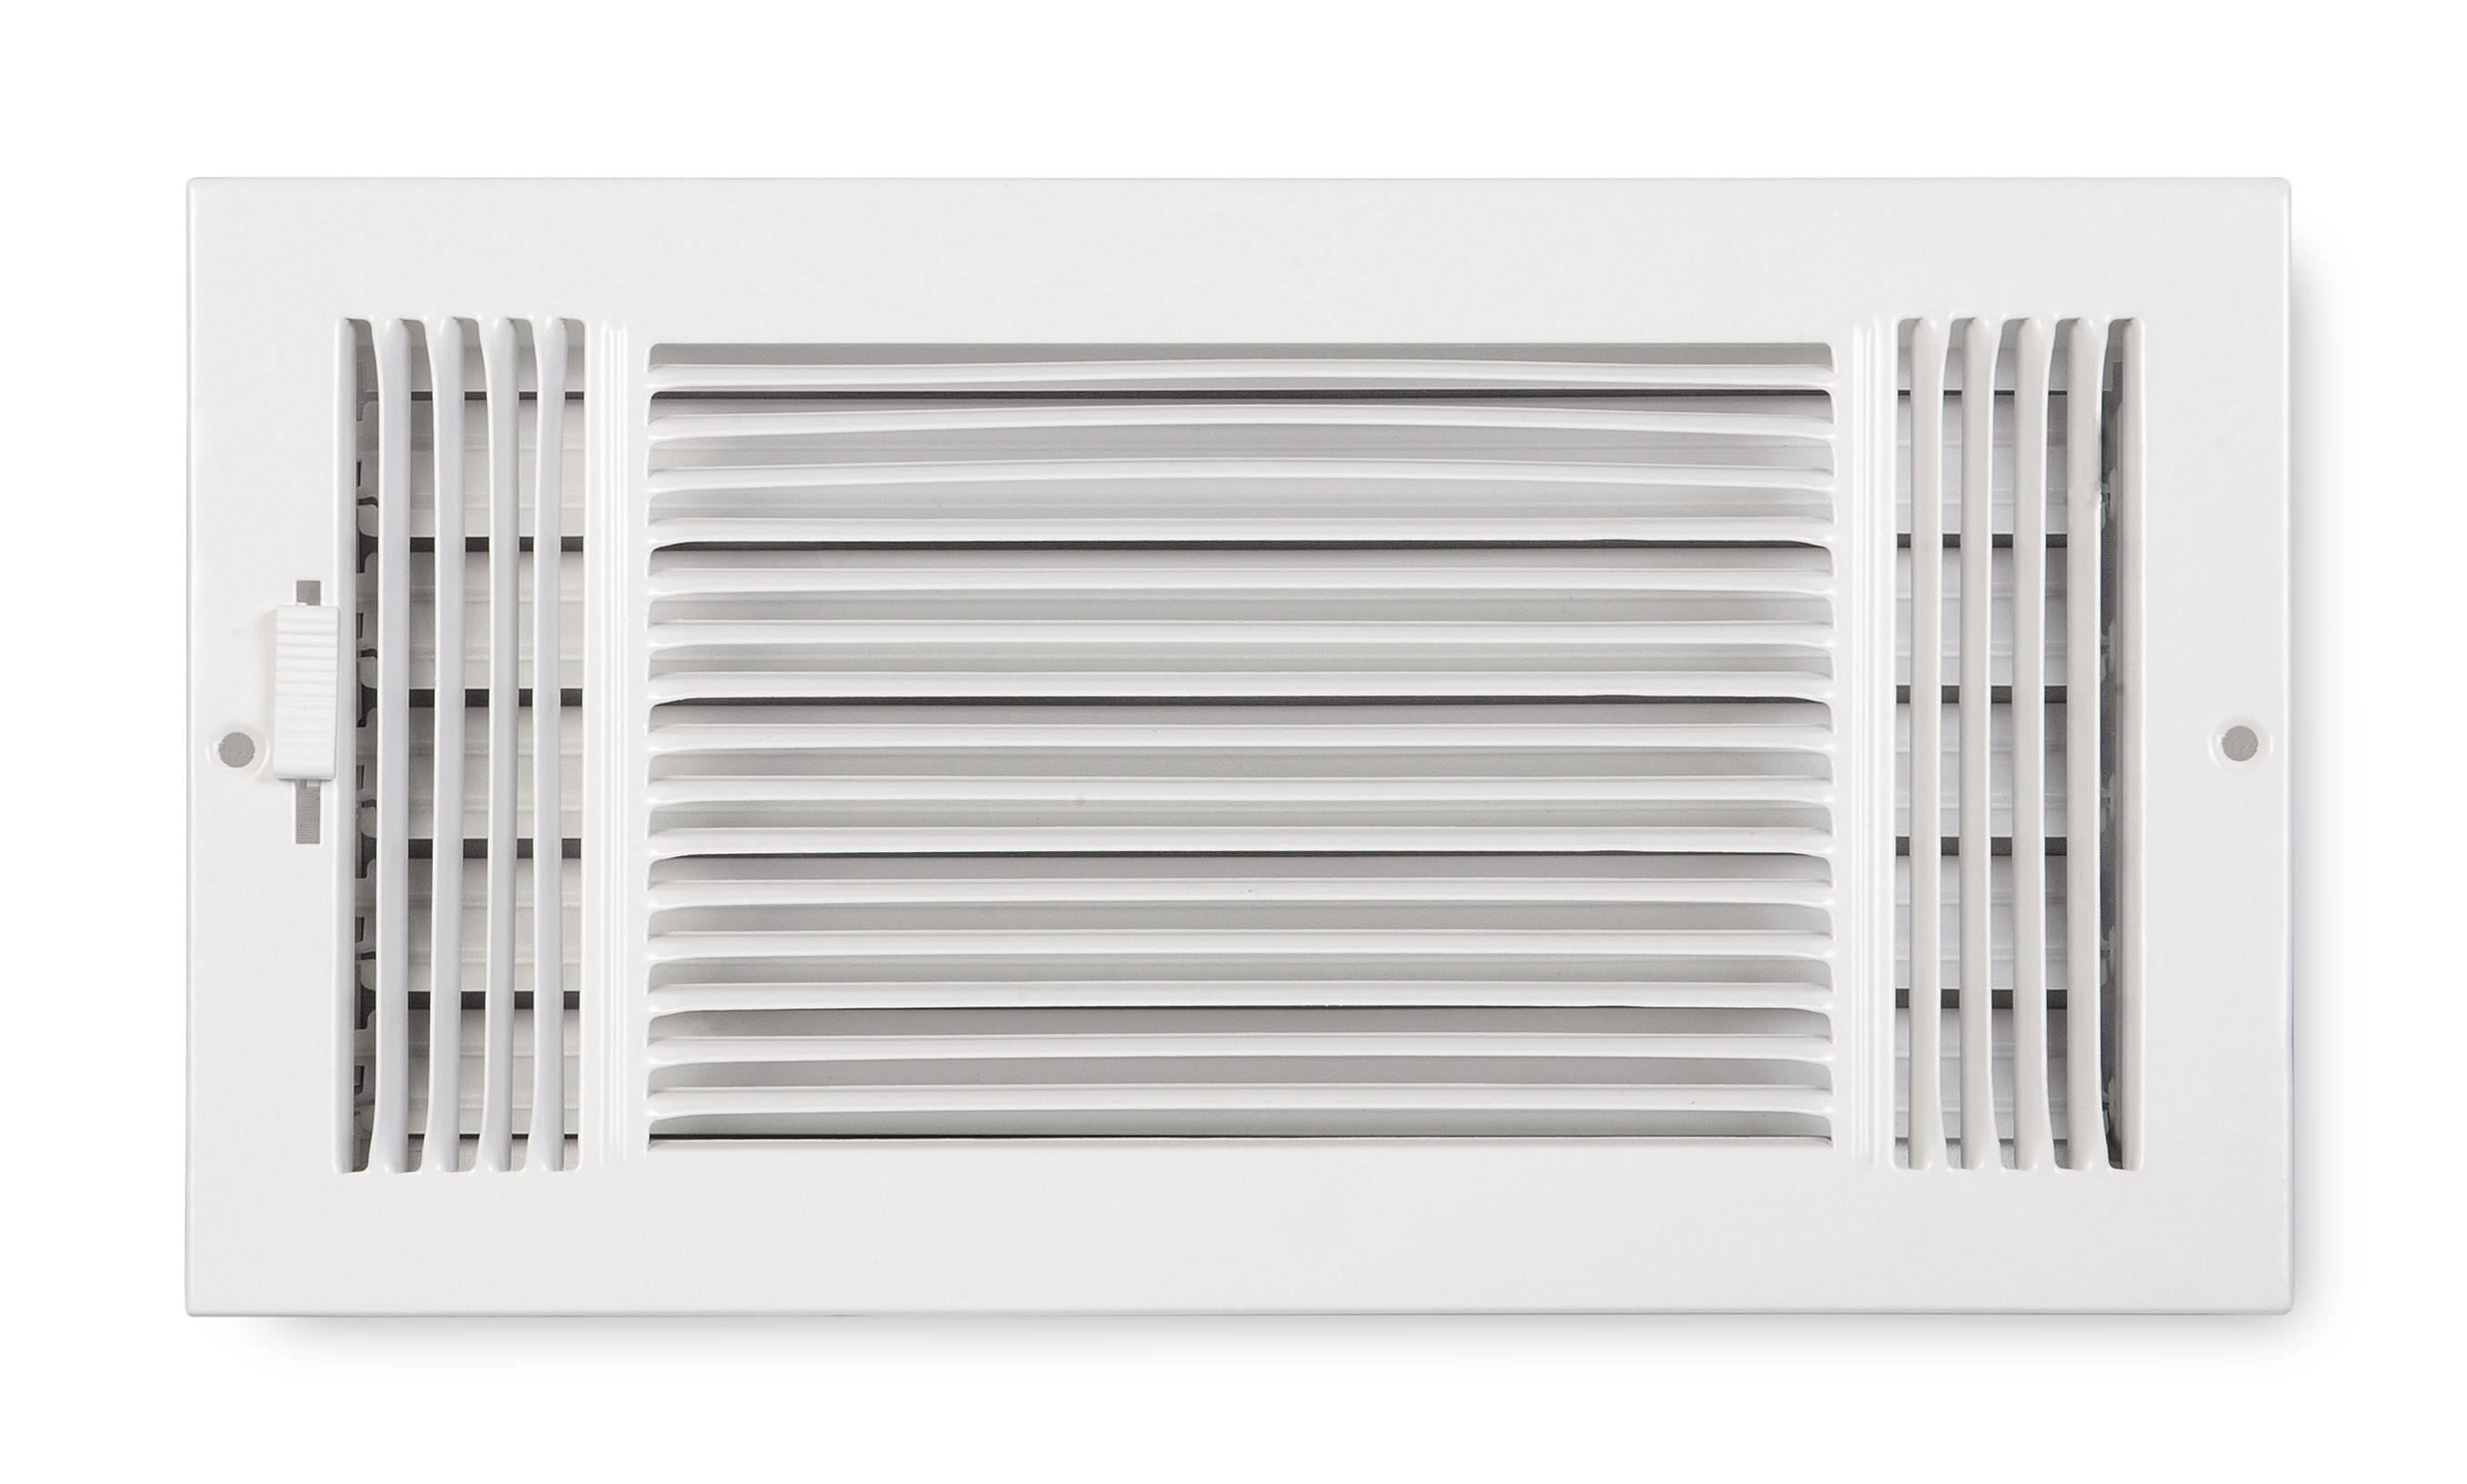 10 x 4 Accord Ventilation ABSWWH2104 Sidewall/Ceiling Register with 2-Way Design Duct Opening Measurements White